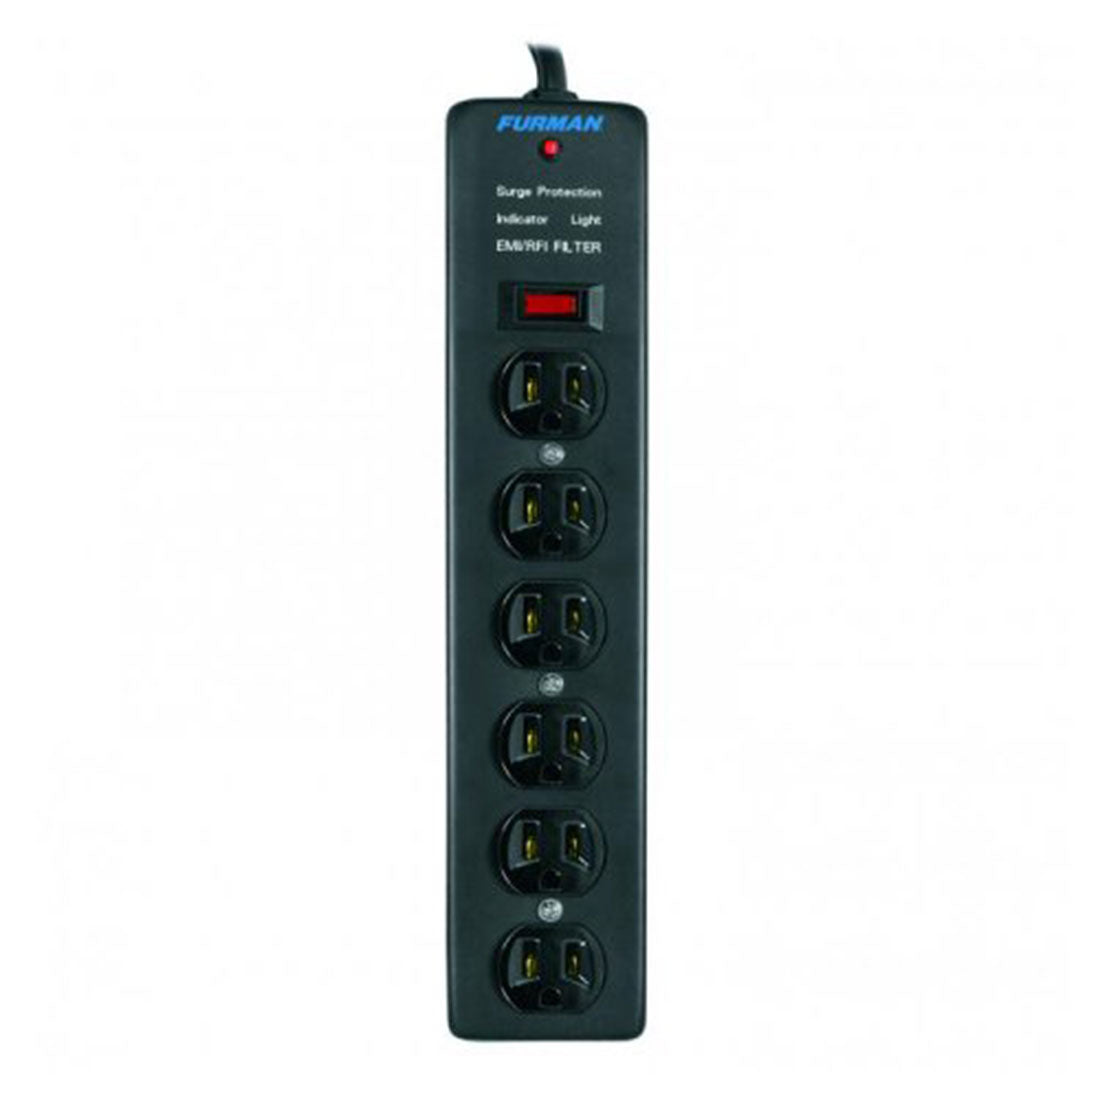 Furman SS-6-FUR 6-Outlet Vertical Power Strip with Surge Protection